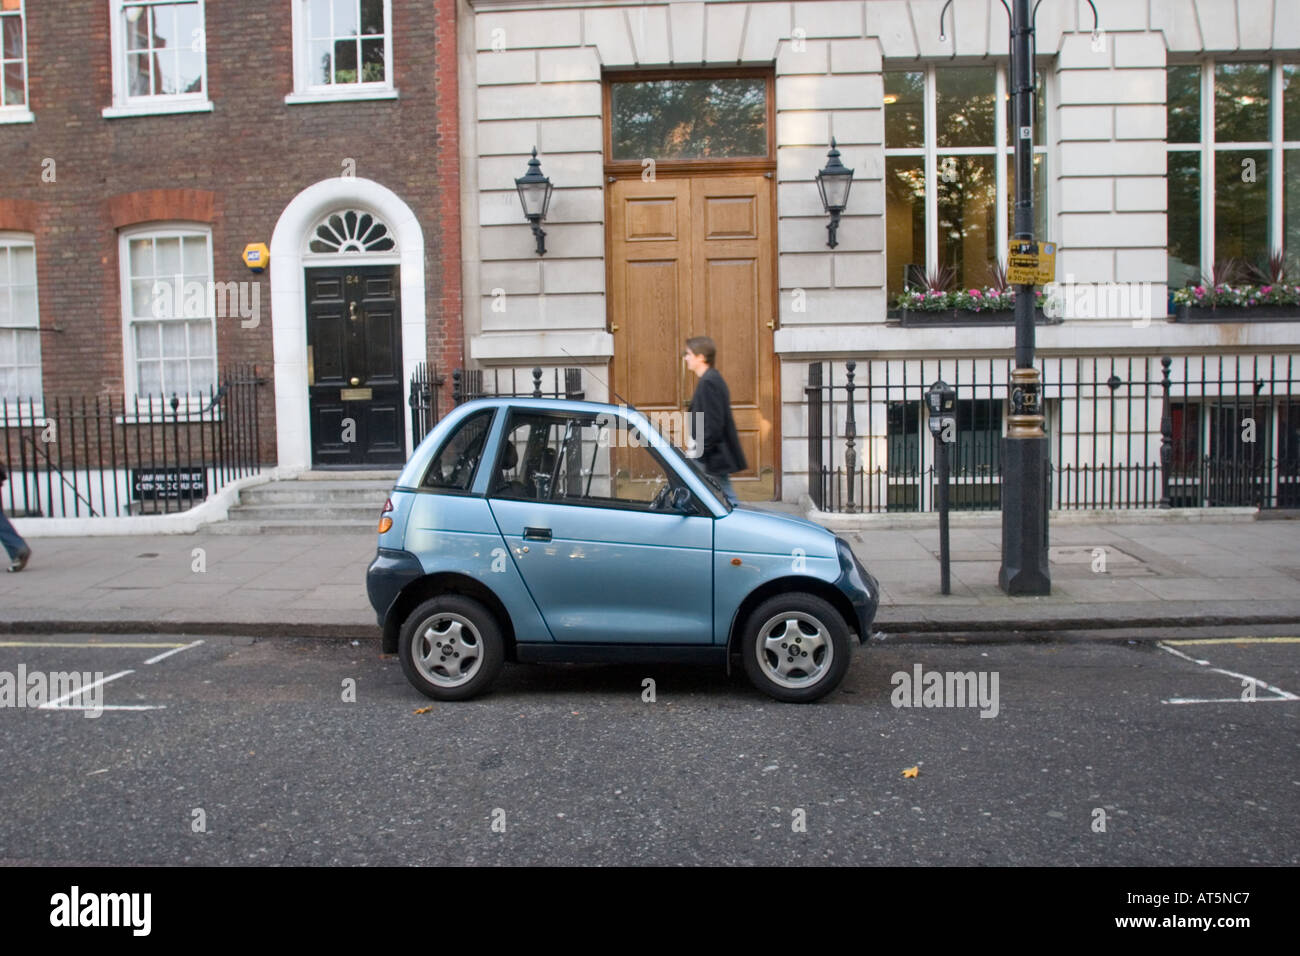 REVA electric car takes up only half a parking meter space landscape L Stock Photo